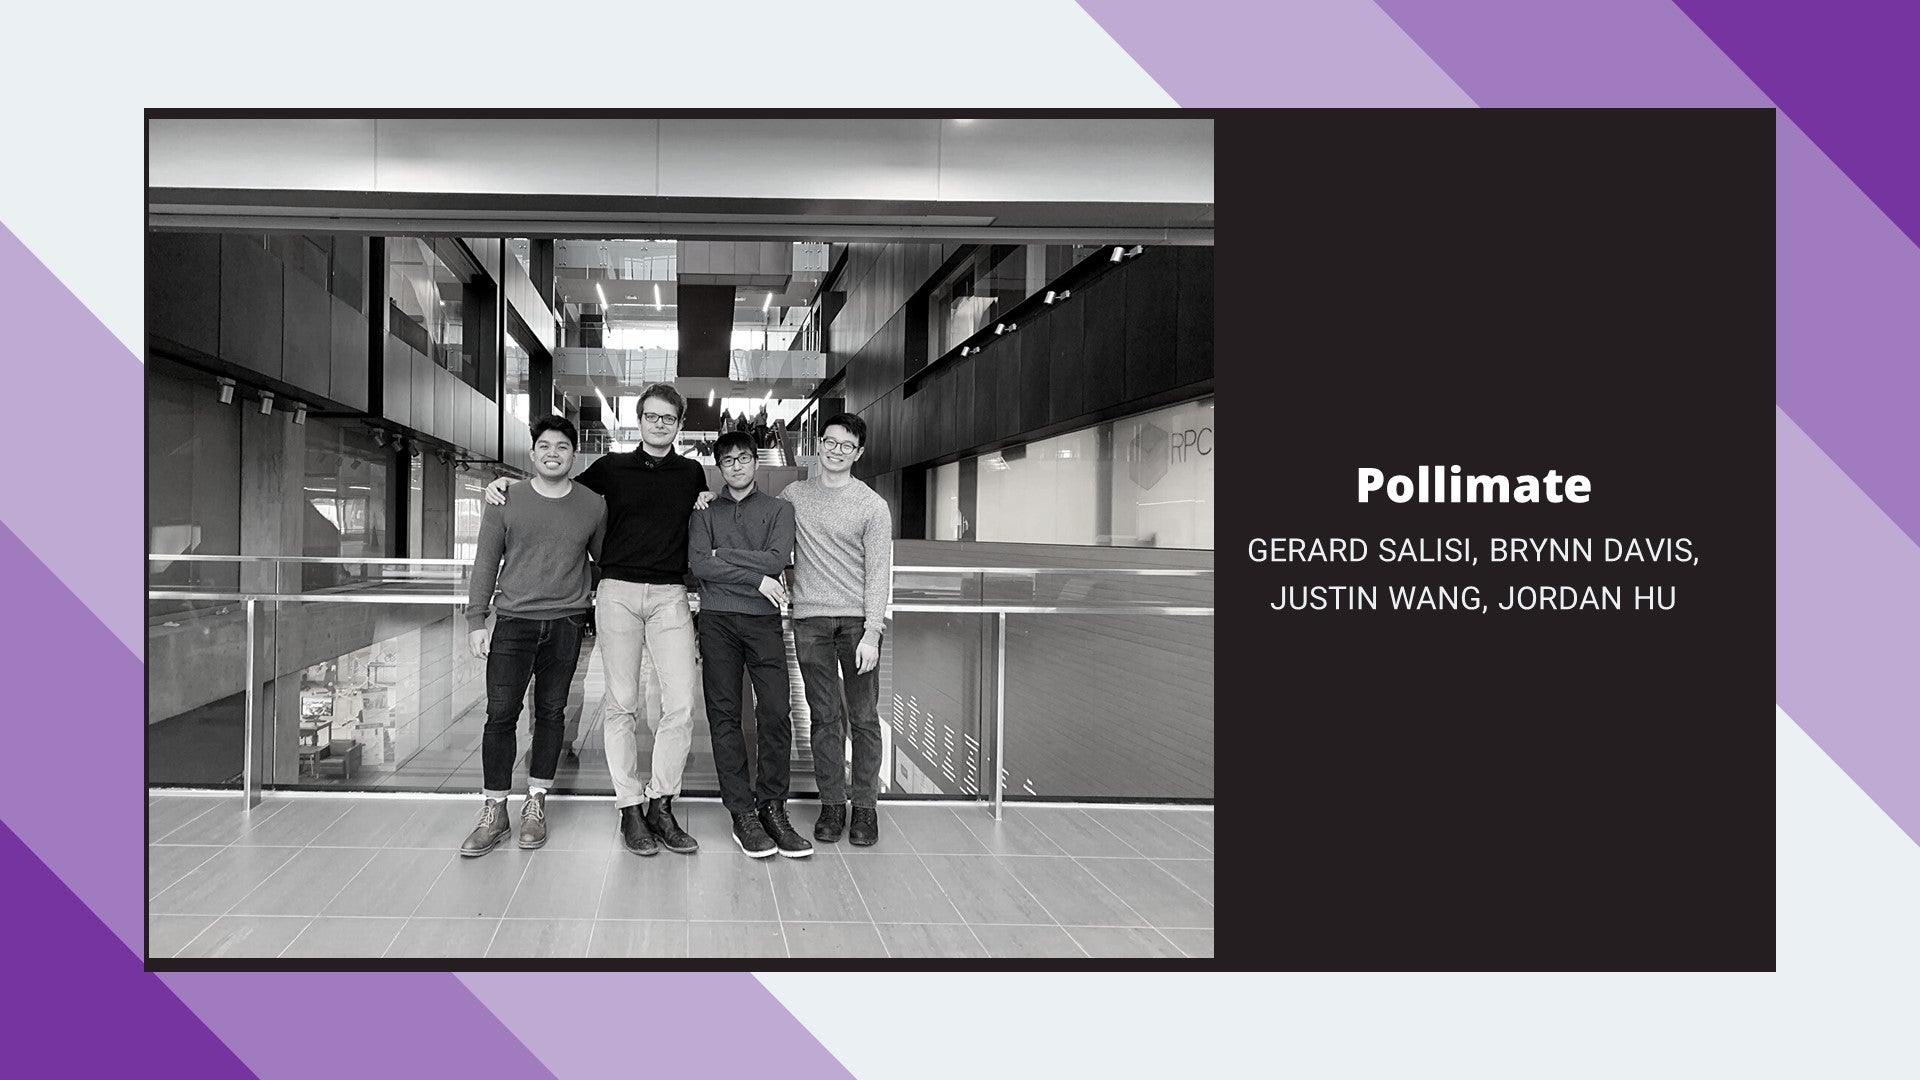 Pollimate is our design team’s technological alternative solution to animal-mediated pollination. 